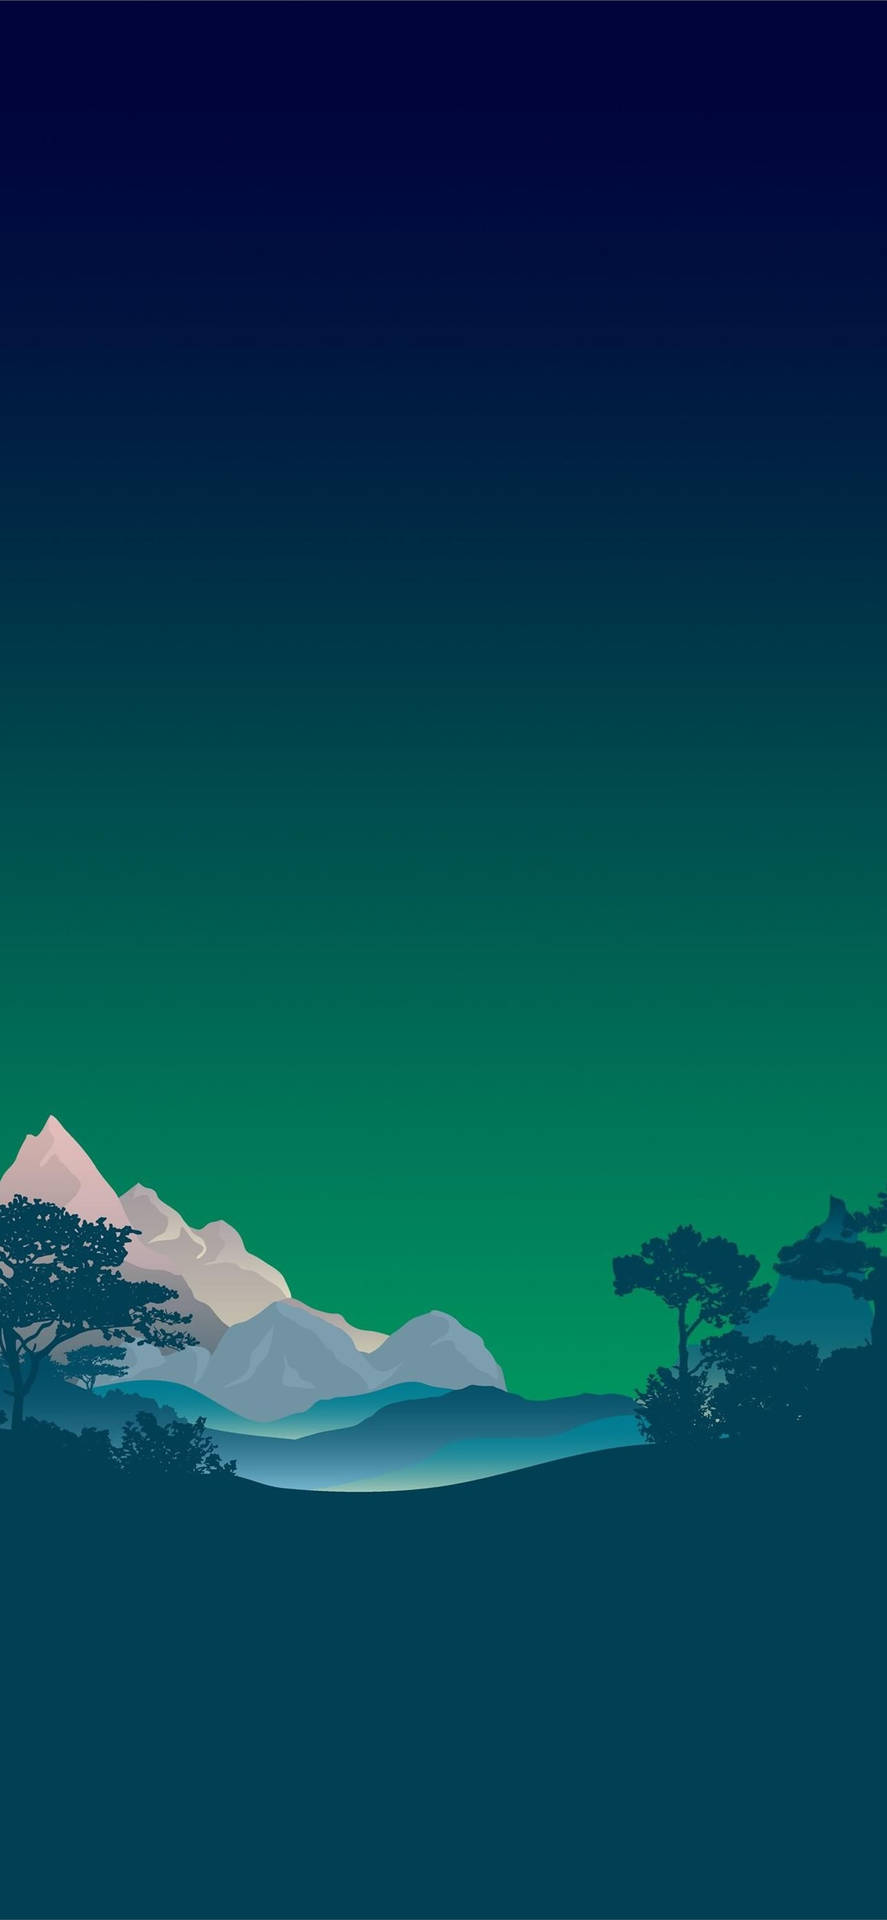 Caption: Stunning Snowy Mountain Green Iphone Wallpaper Background